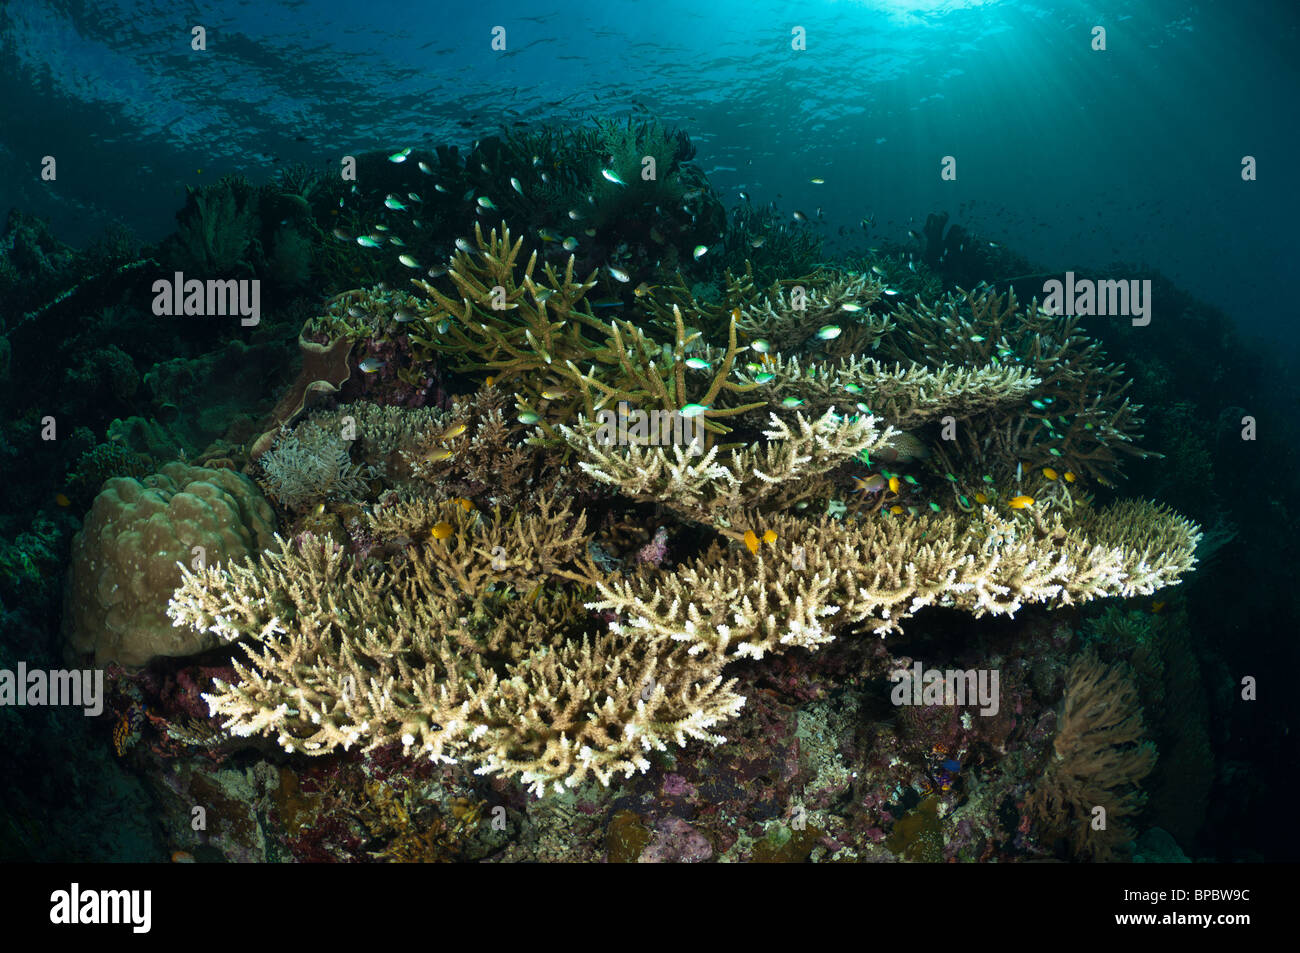 Staghorn coral and damselfish on a healthy reef, Misool, West Papua, Indonesia. Stock Photo